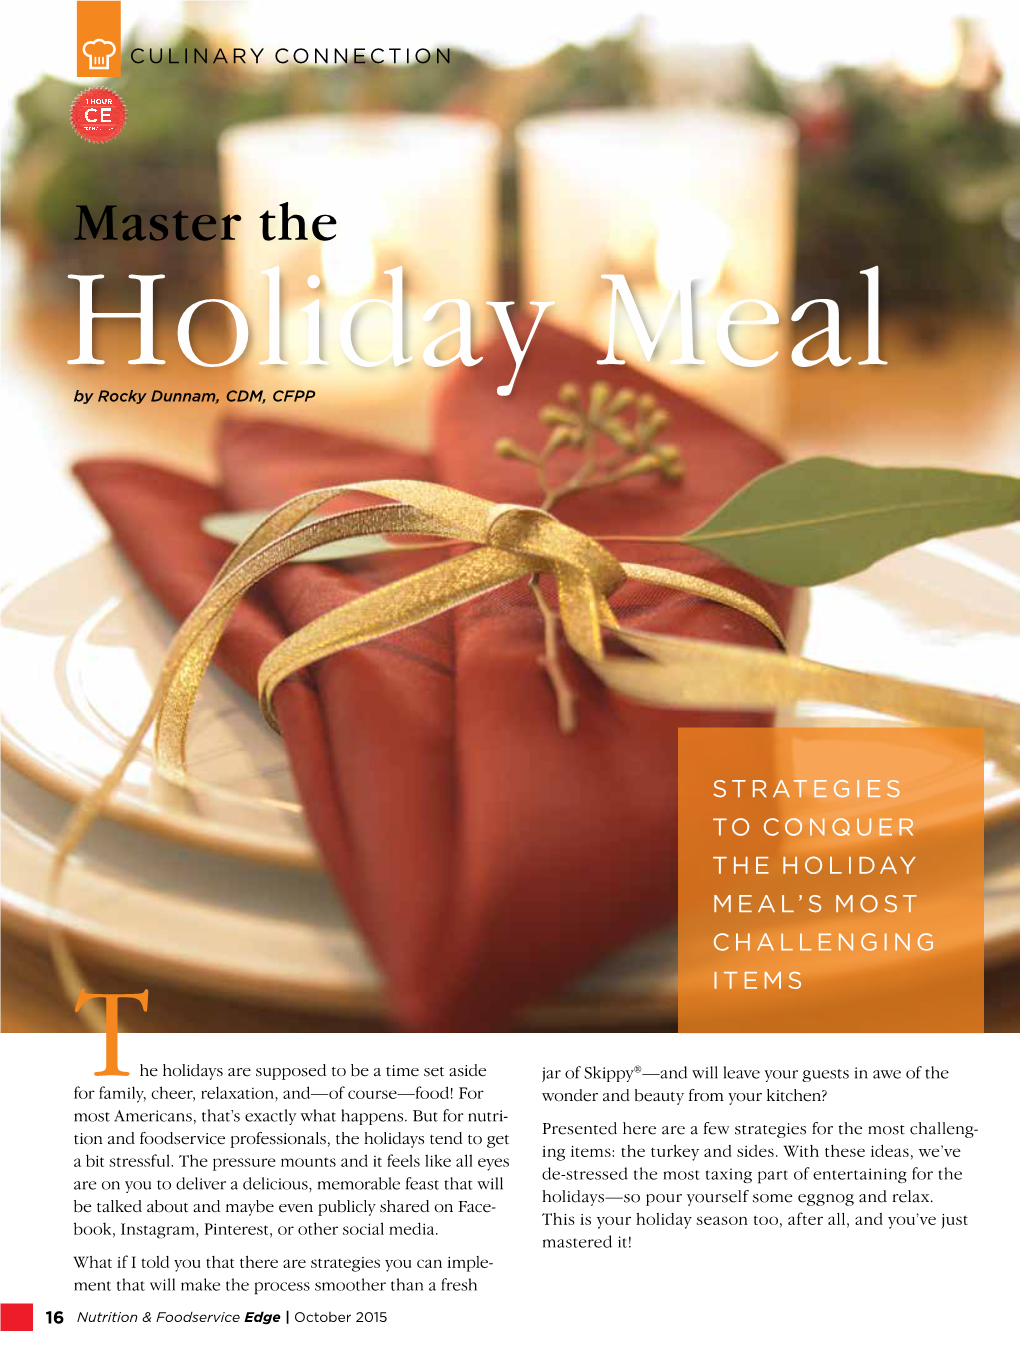 Master the Holiday Meal by Rocky Dunnam, CDM, CFPP